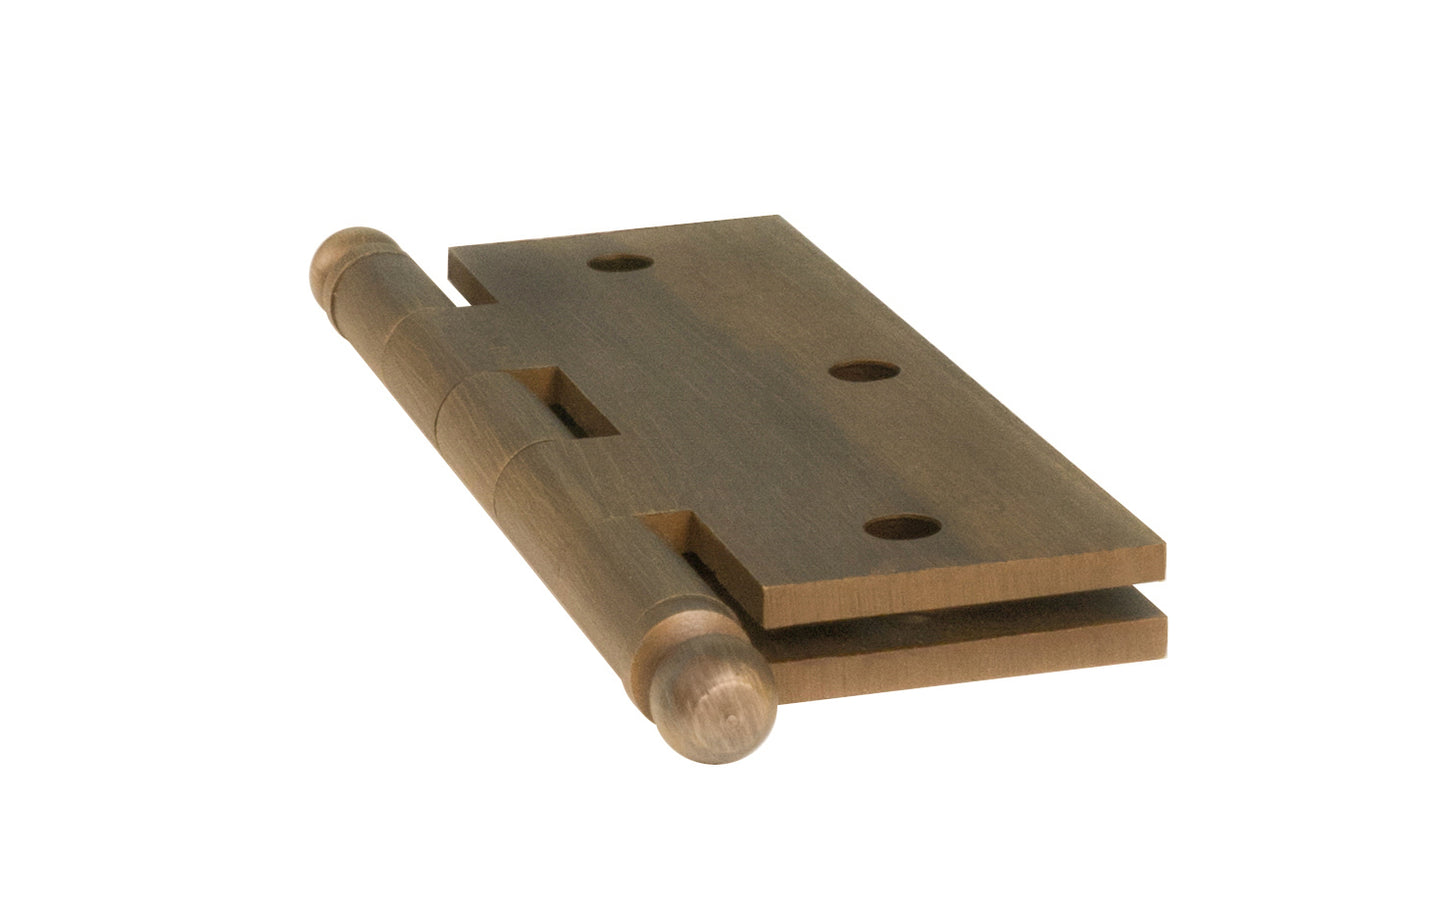 Classic Solid Brass Ball-Tip Cabinet Hinge ~ 2-1/2" x 2". Full mortise extruded hinges. 3/32" heavy duty leaf thickness gauge. Non-removable fixed hinge pin with ball tips. High quality thick cabinet hinge with ball tips. Antique Brass finish. Side View.